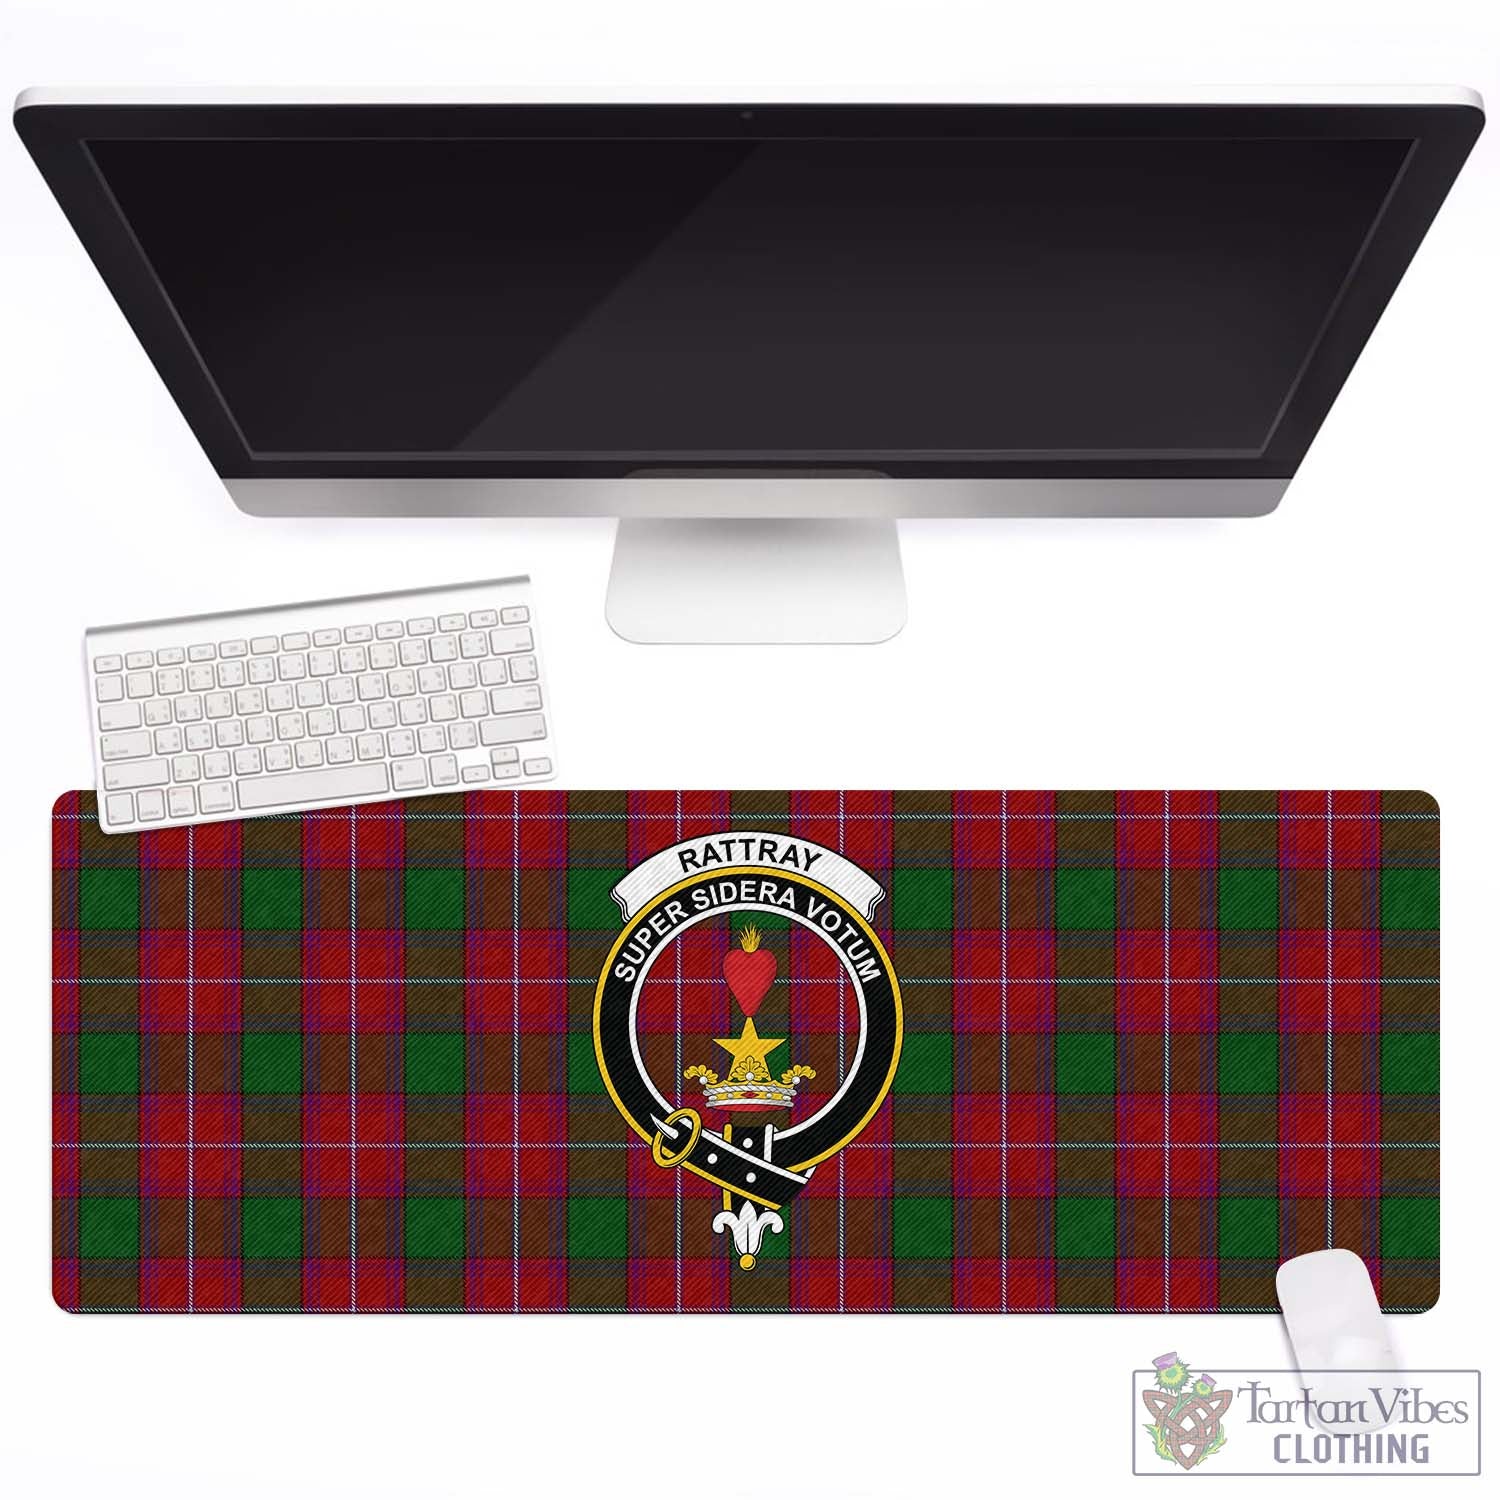 Tartan Vibes Clothing Rattray Tartan Mouse Pad with Family Crest